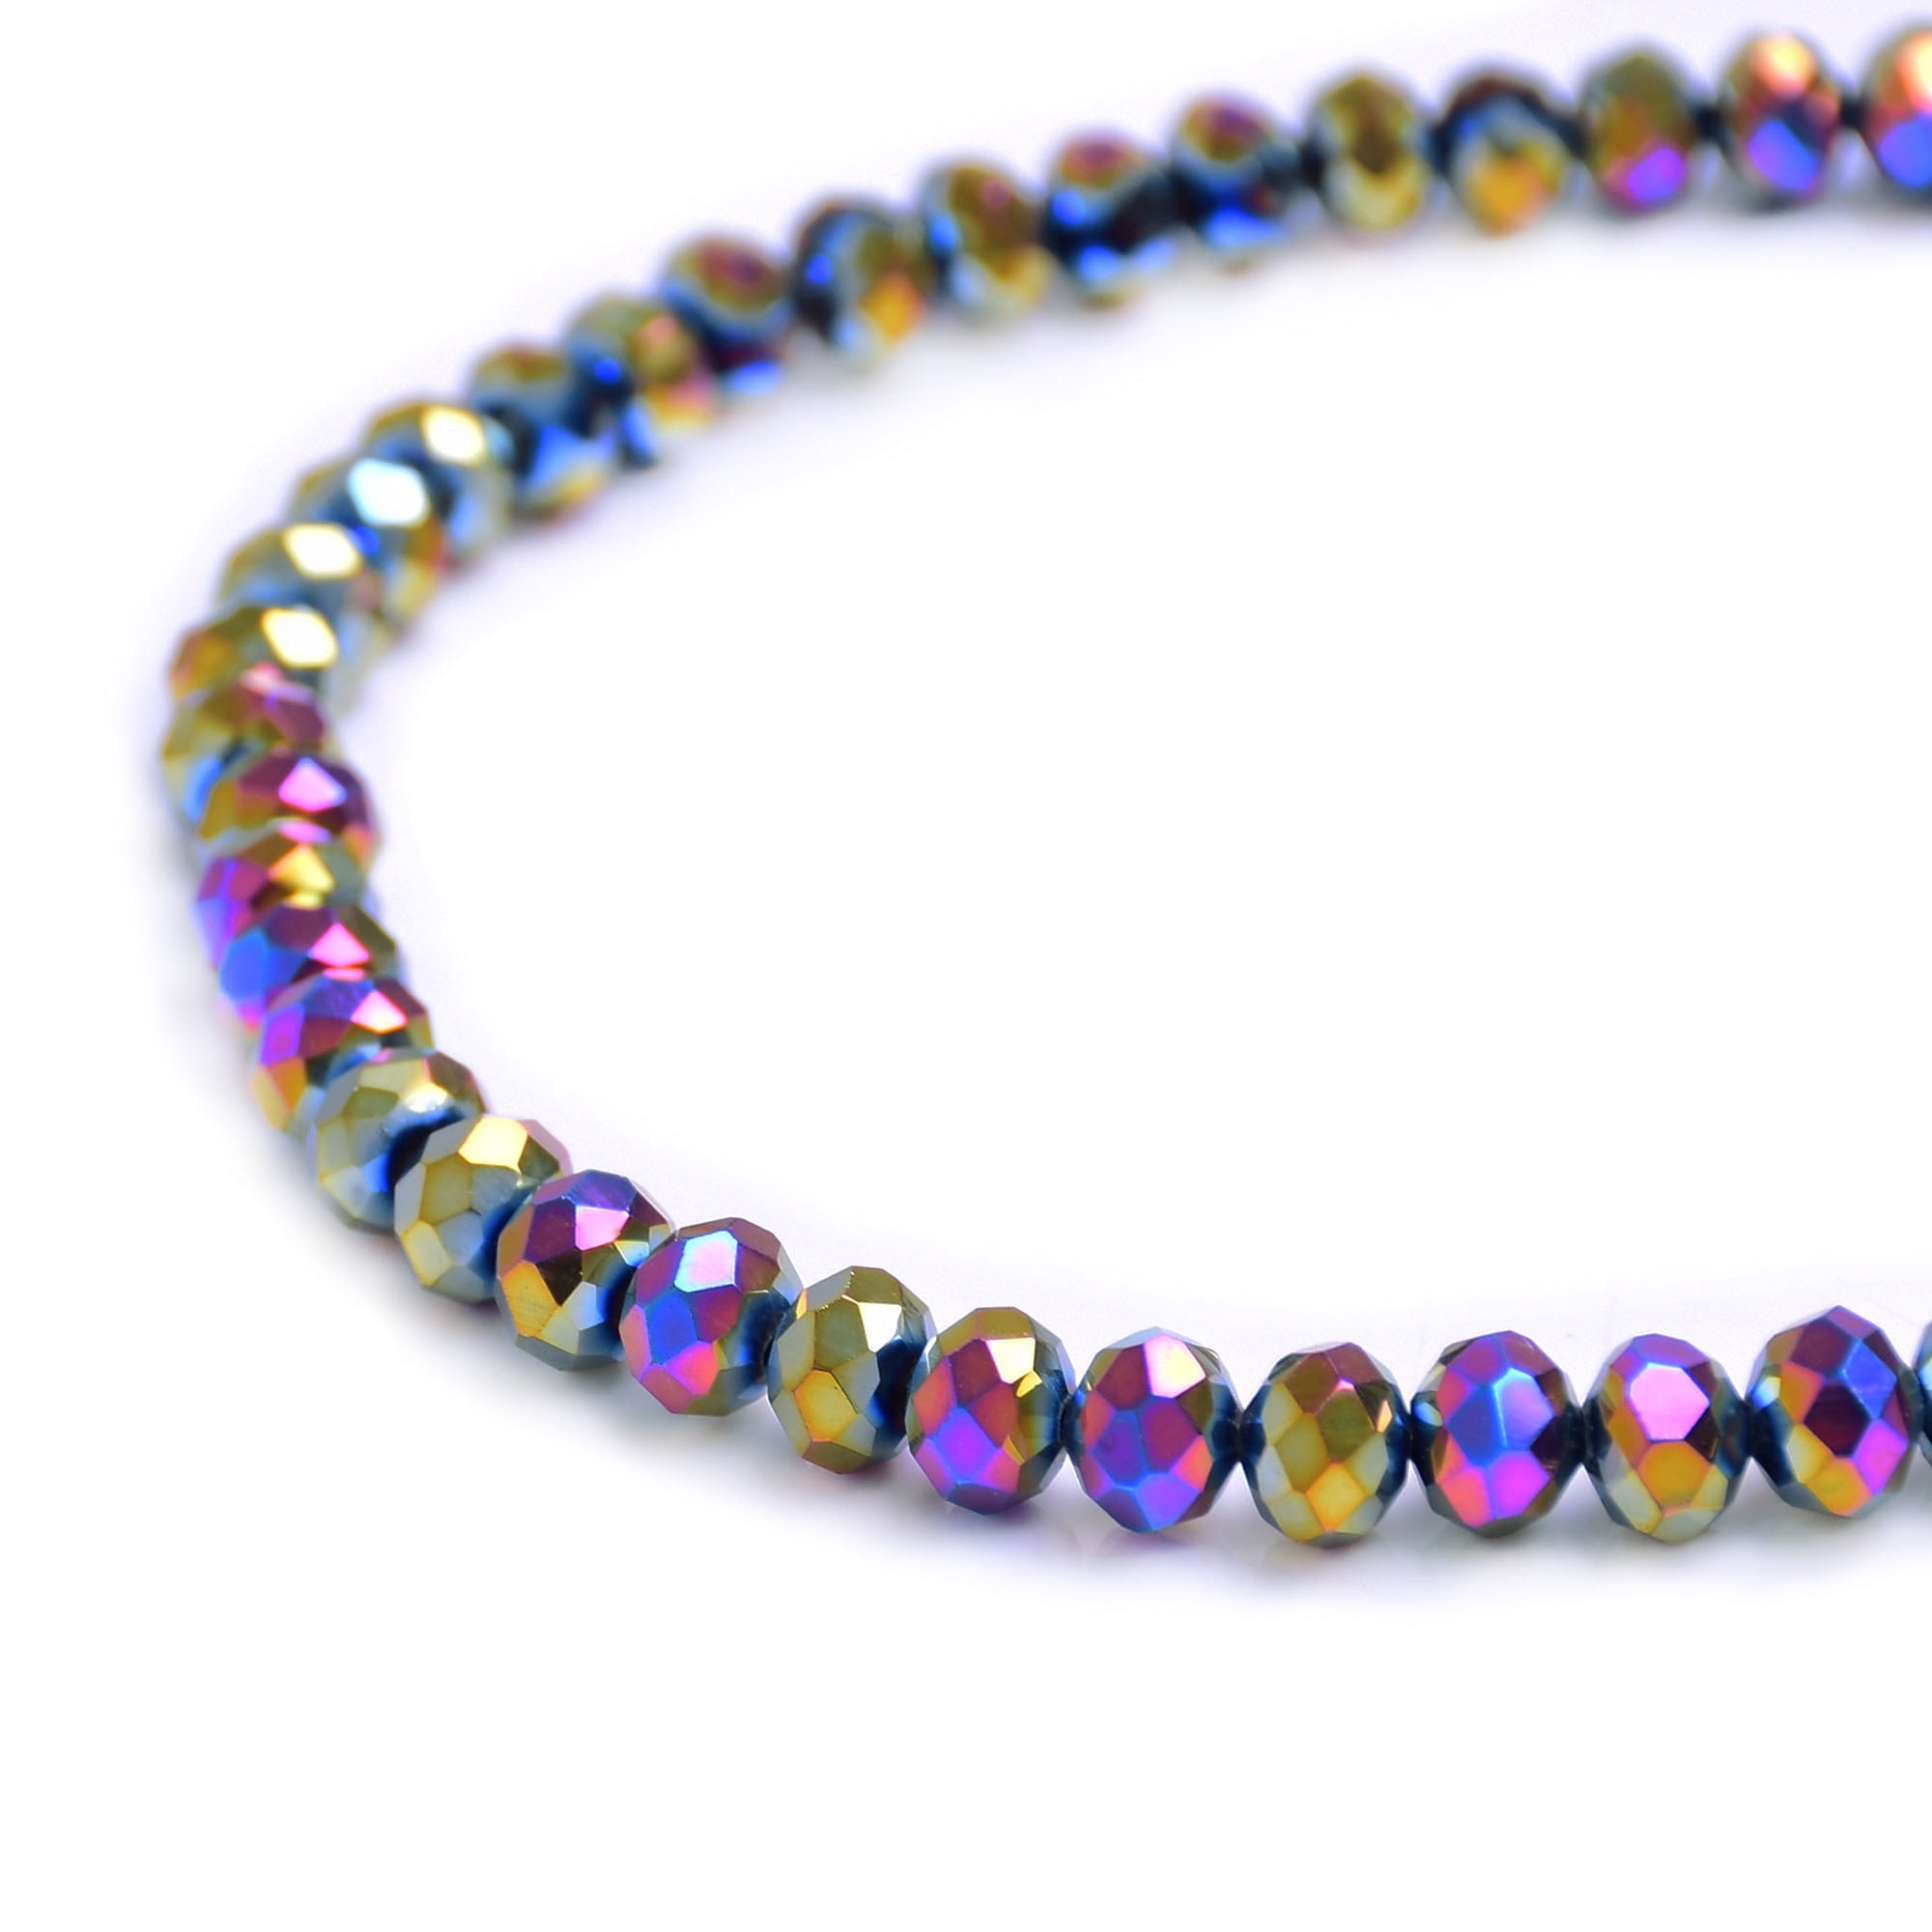 New Faceted Rondelle Jewelry Bicone Crafts Glass Crystal Beads Multicolor 